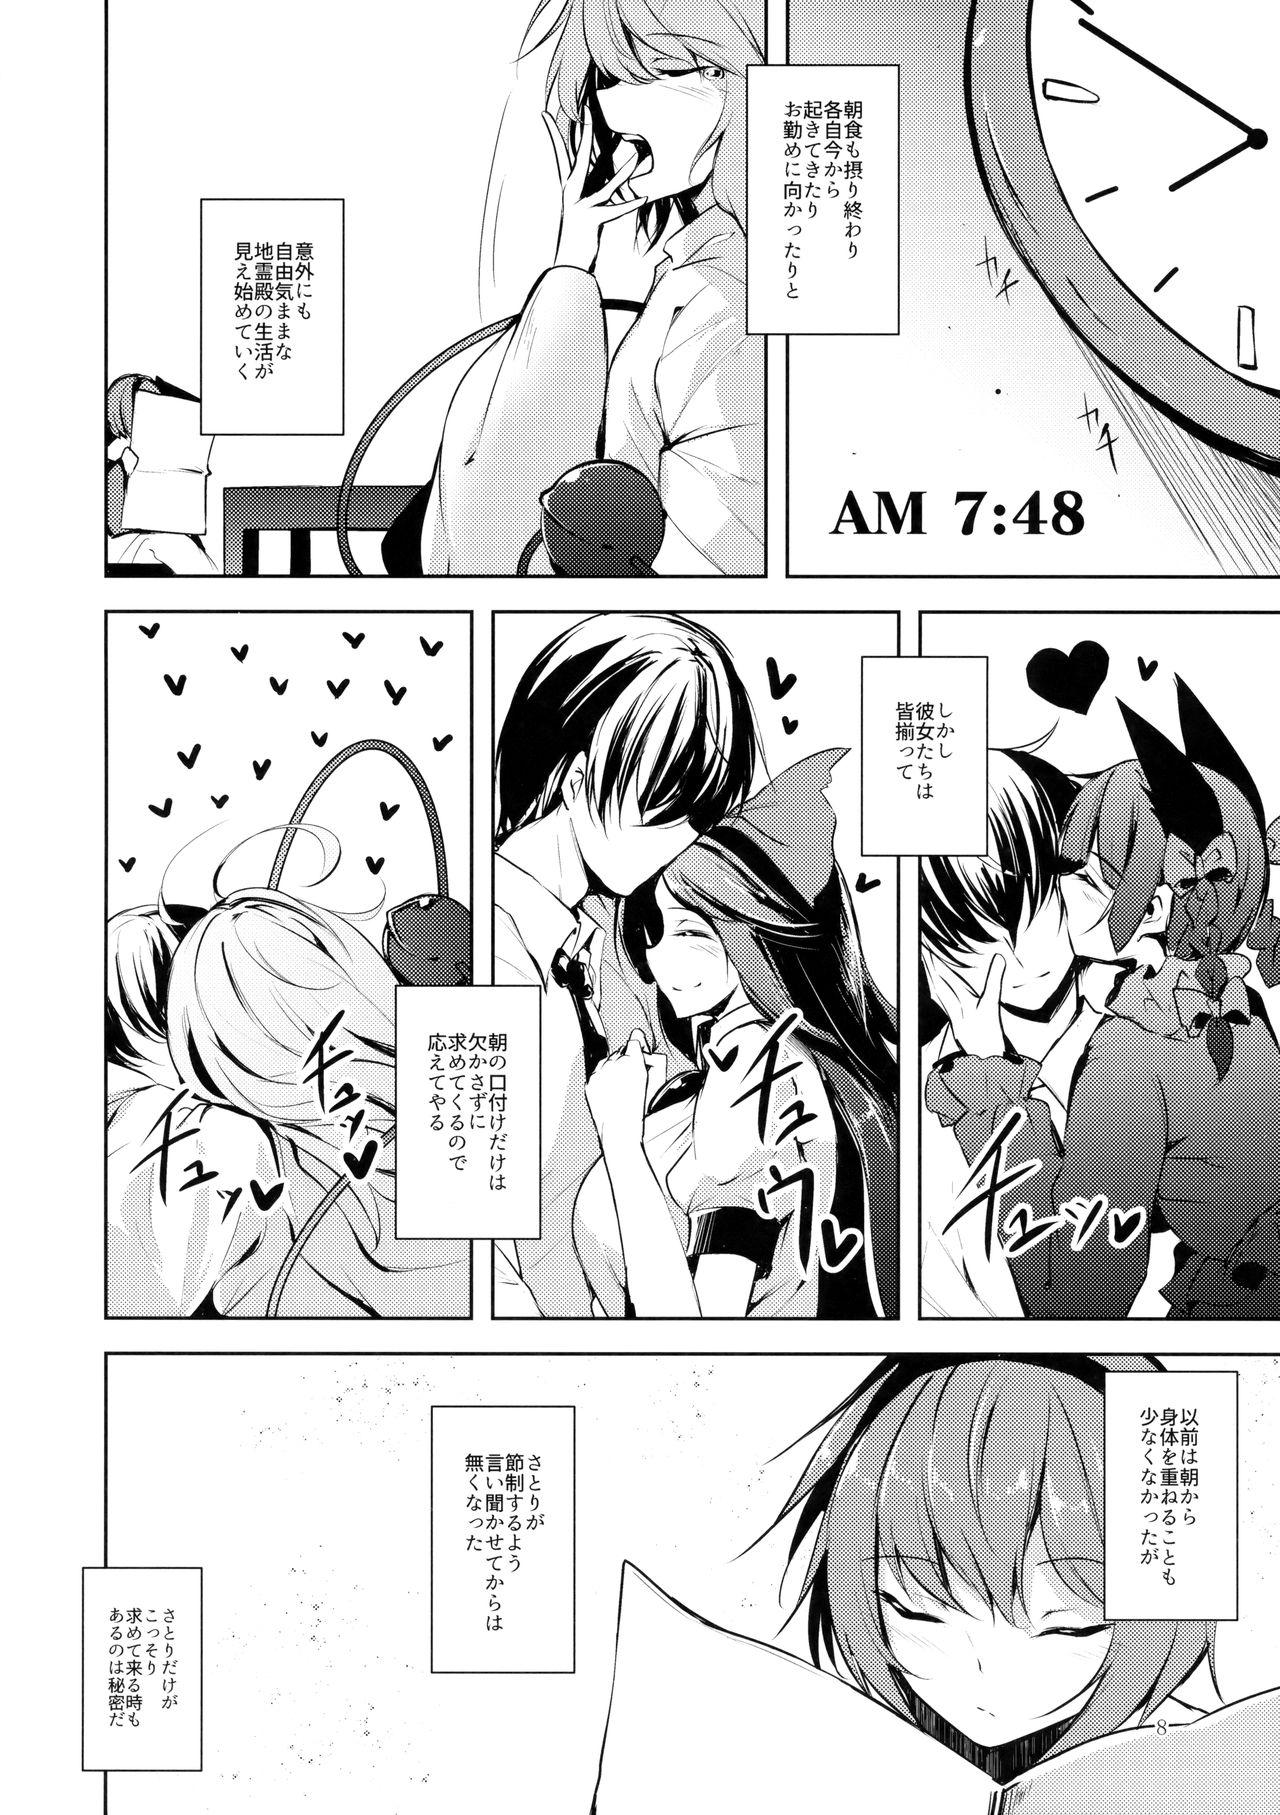 Bus Komeiji Schedule AM - Touhou project Best Blowjobs Ever - Page 9